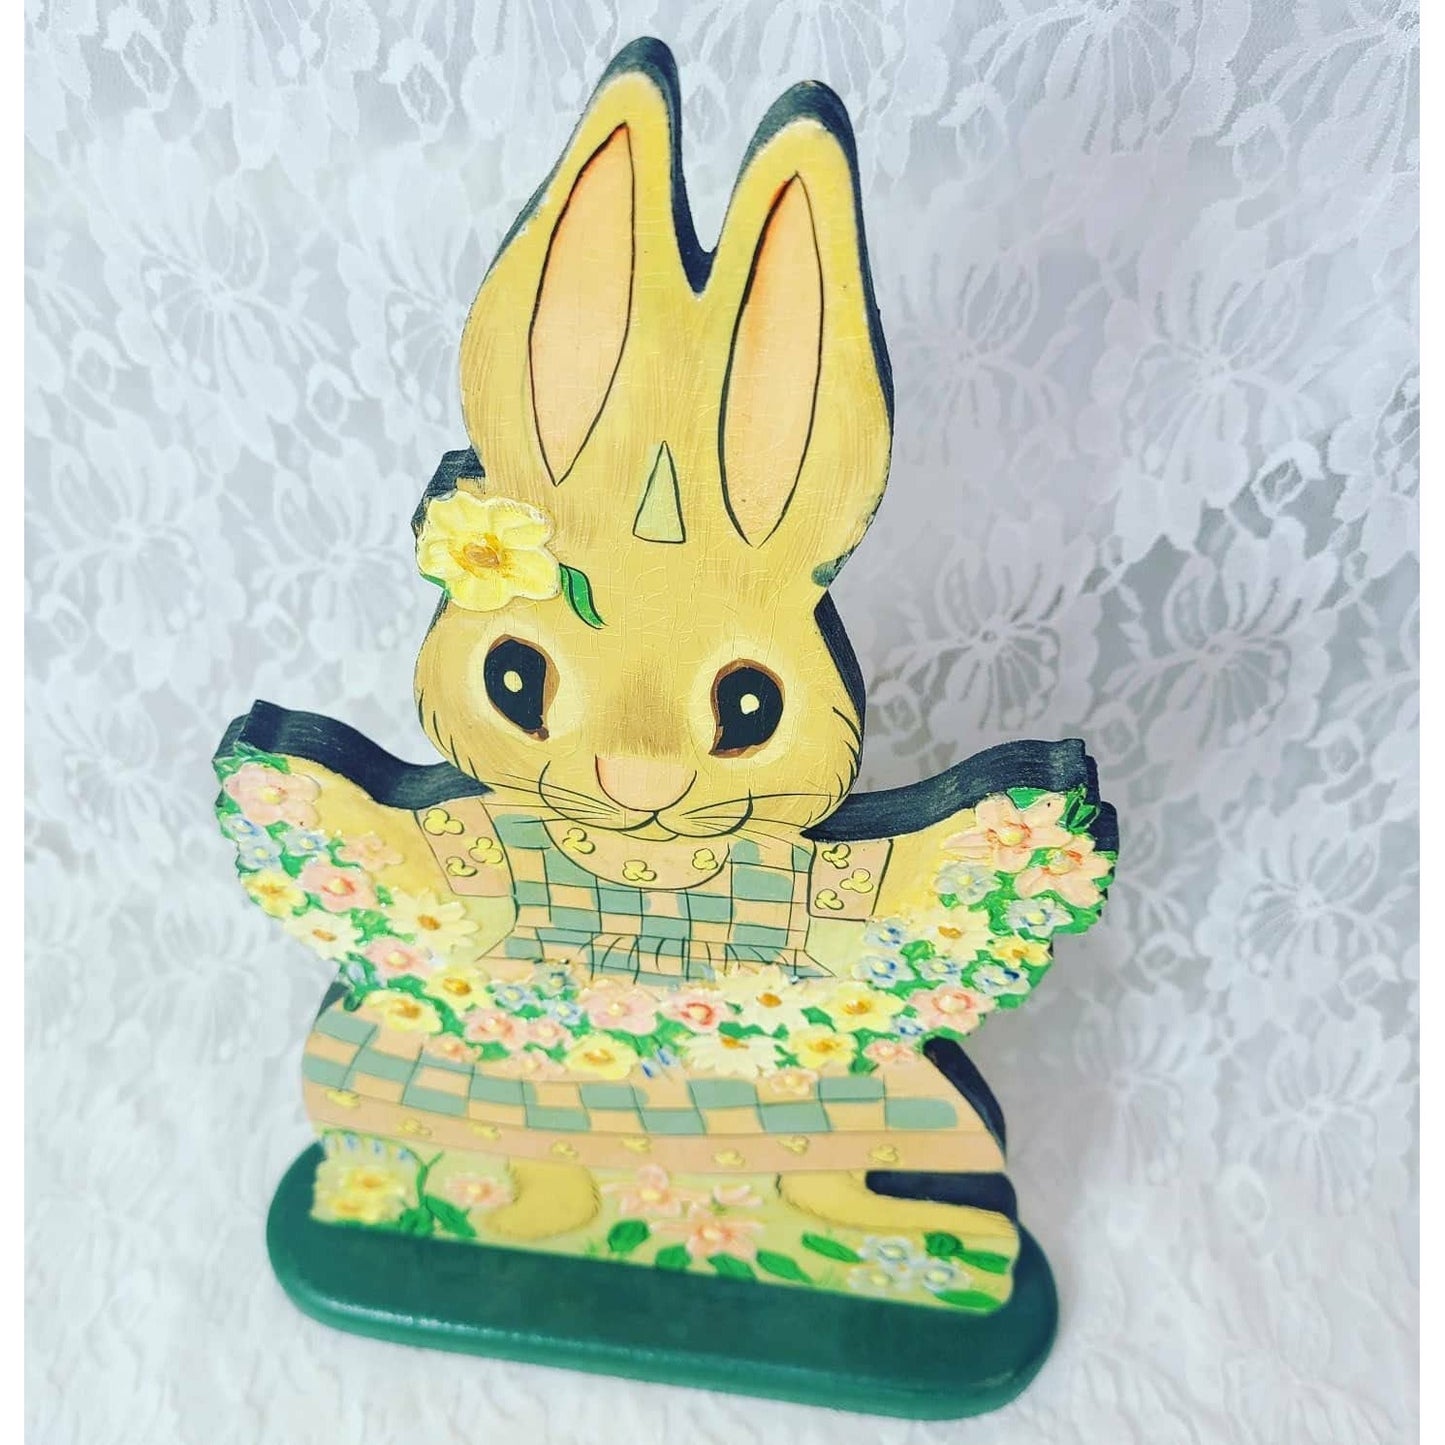 Easter Decorations Vintage 1980s Wooden Handmade Easter Bunny Freestanding Wood Table Ornament ~ Easter Bunny Art